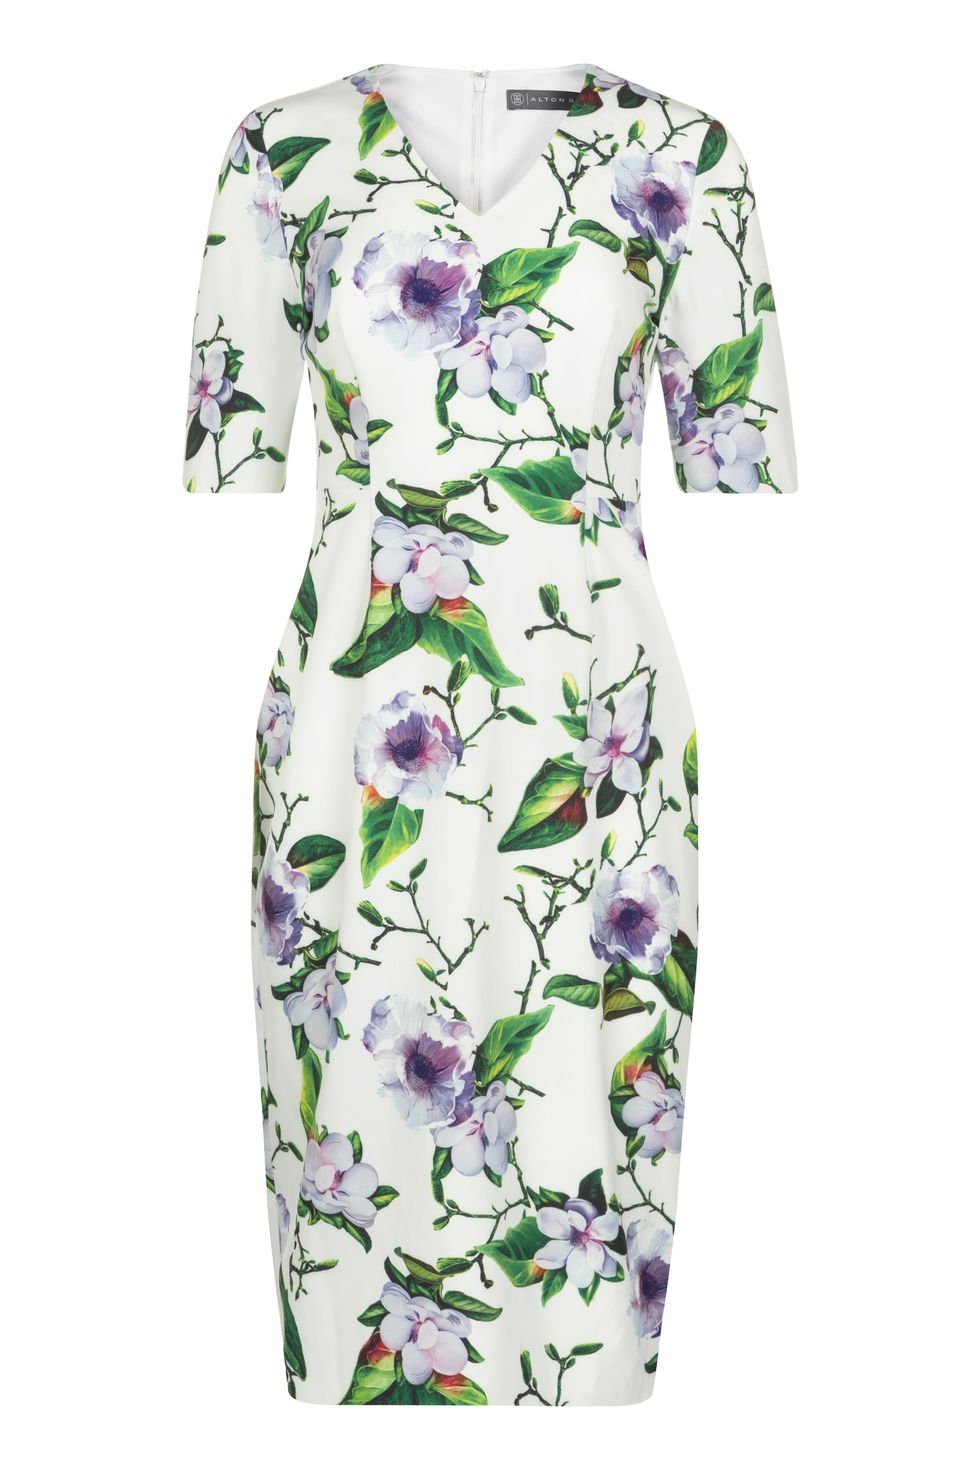 Clothing, White, Day dress, Dress, Green, Purple, Violet, Lilac, Sleeve, Cocktail dress, 